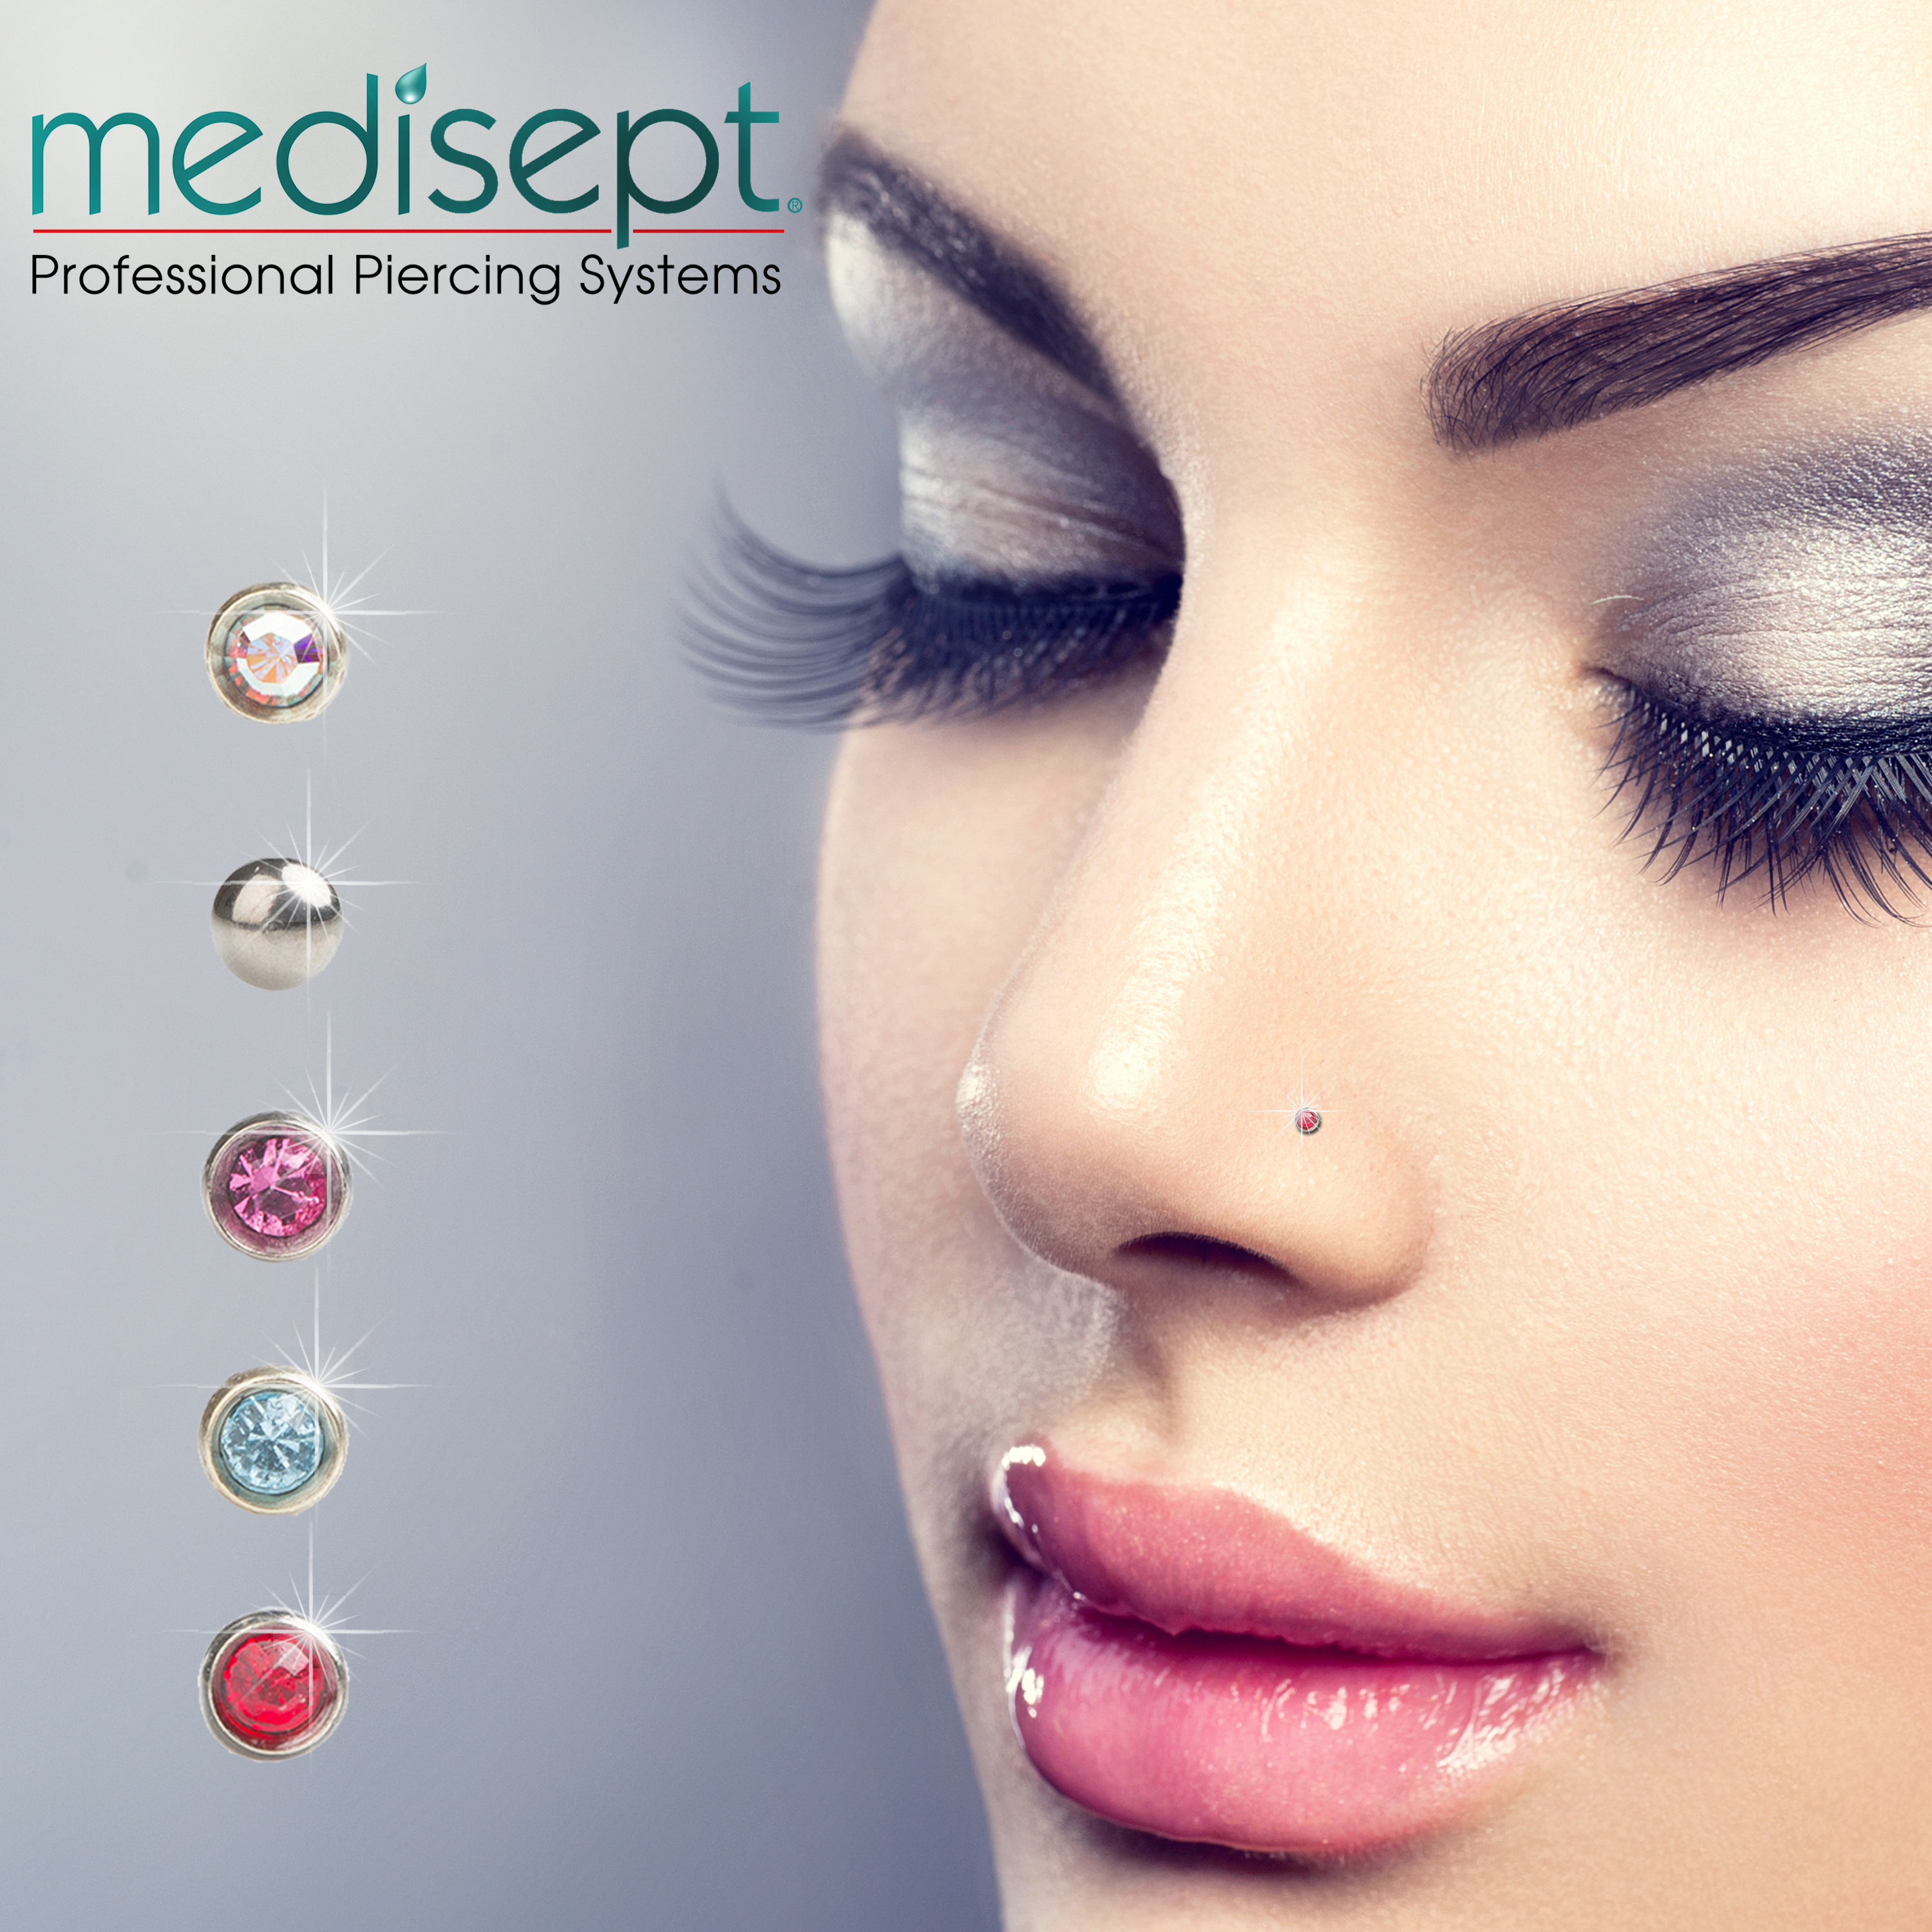 Medisept titanium nose studs, where your eyes get stuck shows you what your soul is looking for!